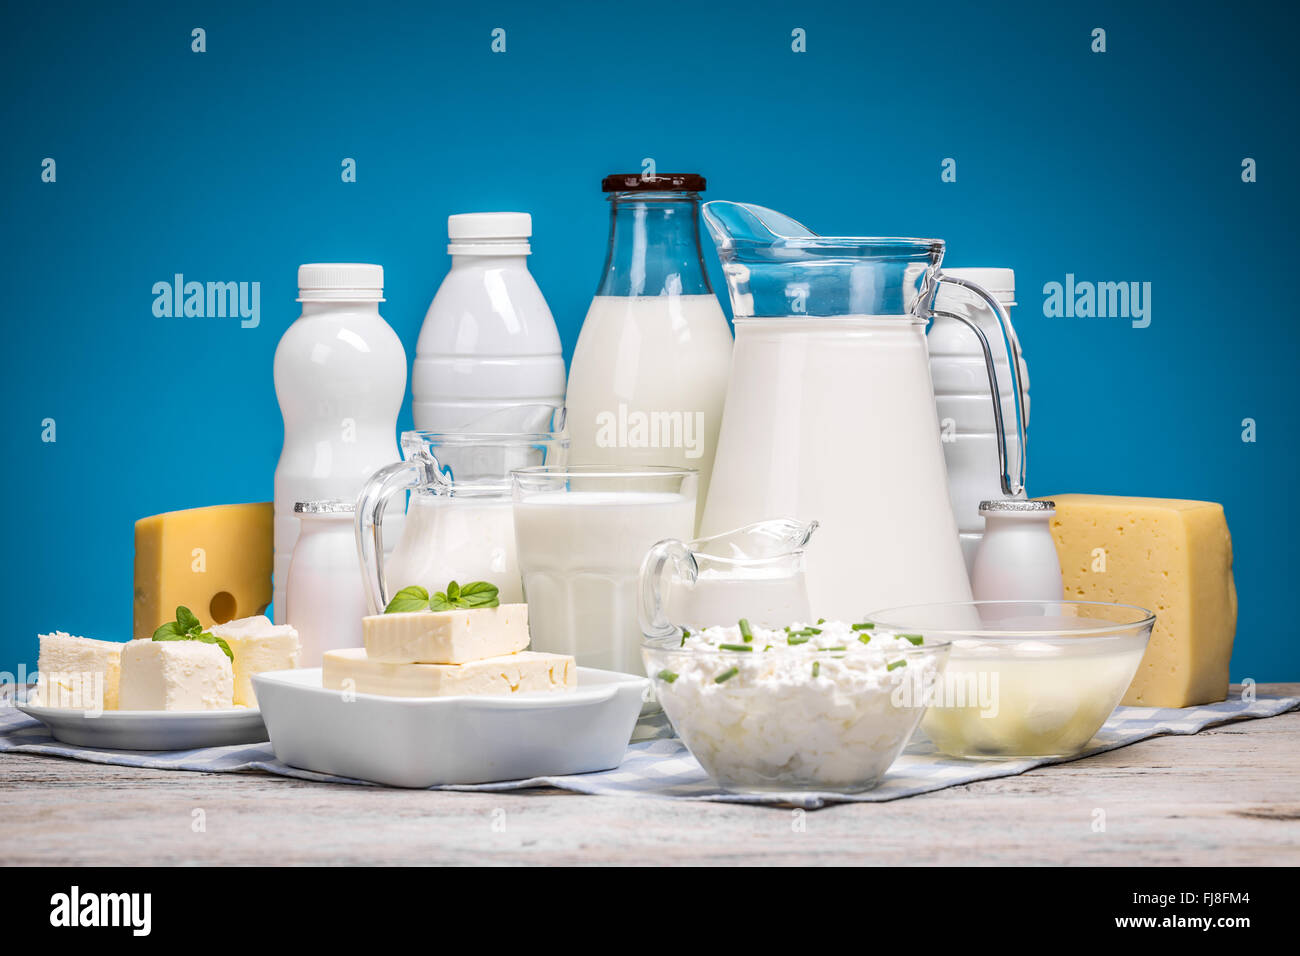 Tasty healthy dairy products on a table on a blue background Stock Photo